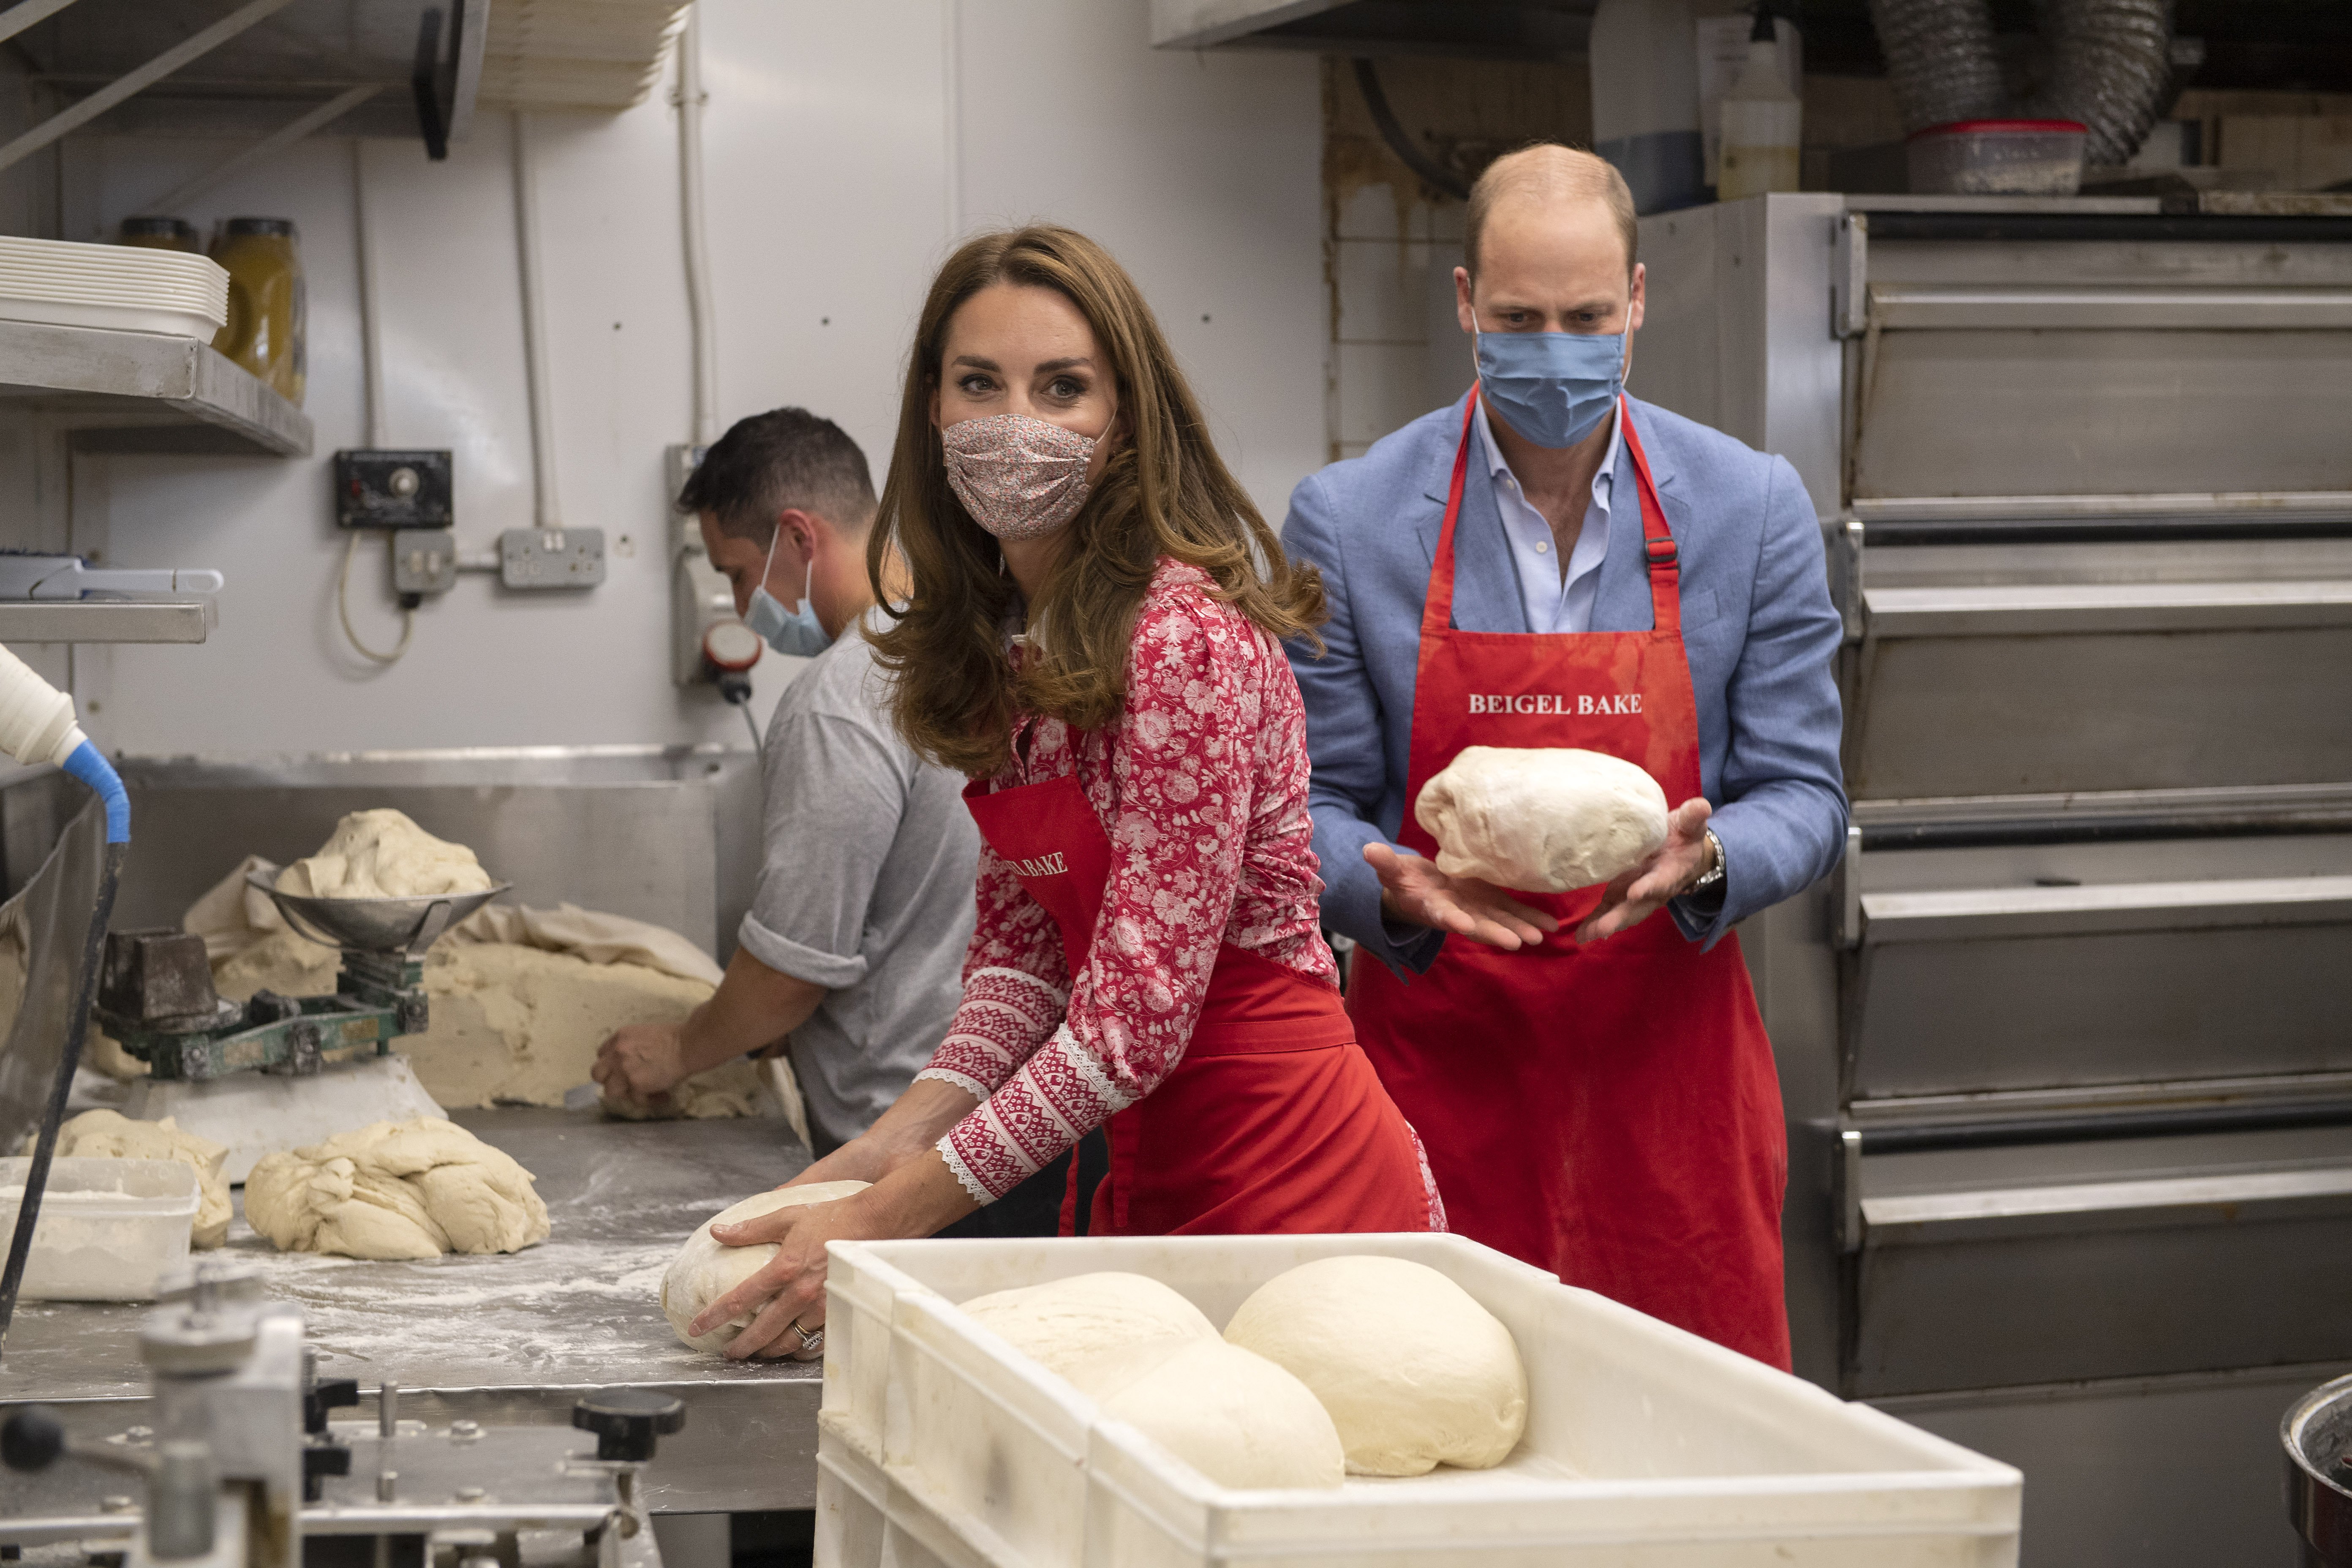 Kate Middleton and her husband Prince William pictured kneading dough during a visit to Beigel Bake Brick Lane Bakery on September 15, 2020 in London, England. / Source: Getty Images